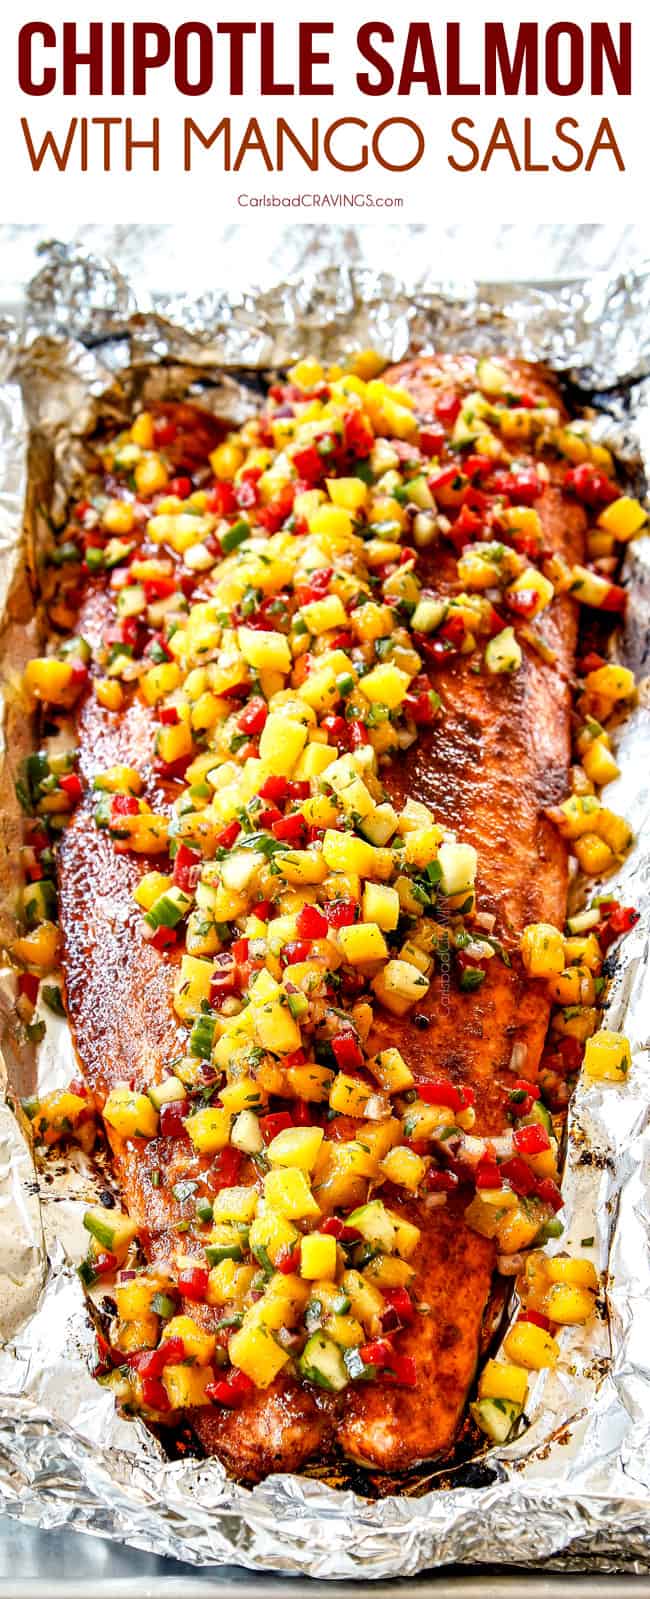 Easy Baked Chipotle Salmon With Mango Salsa Video